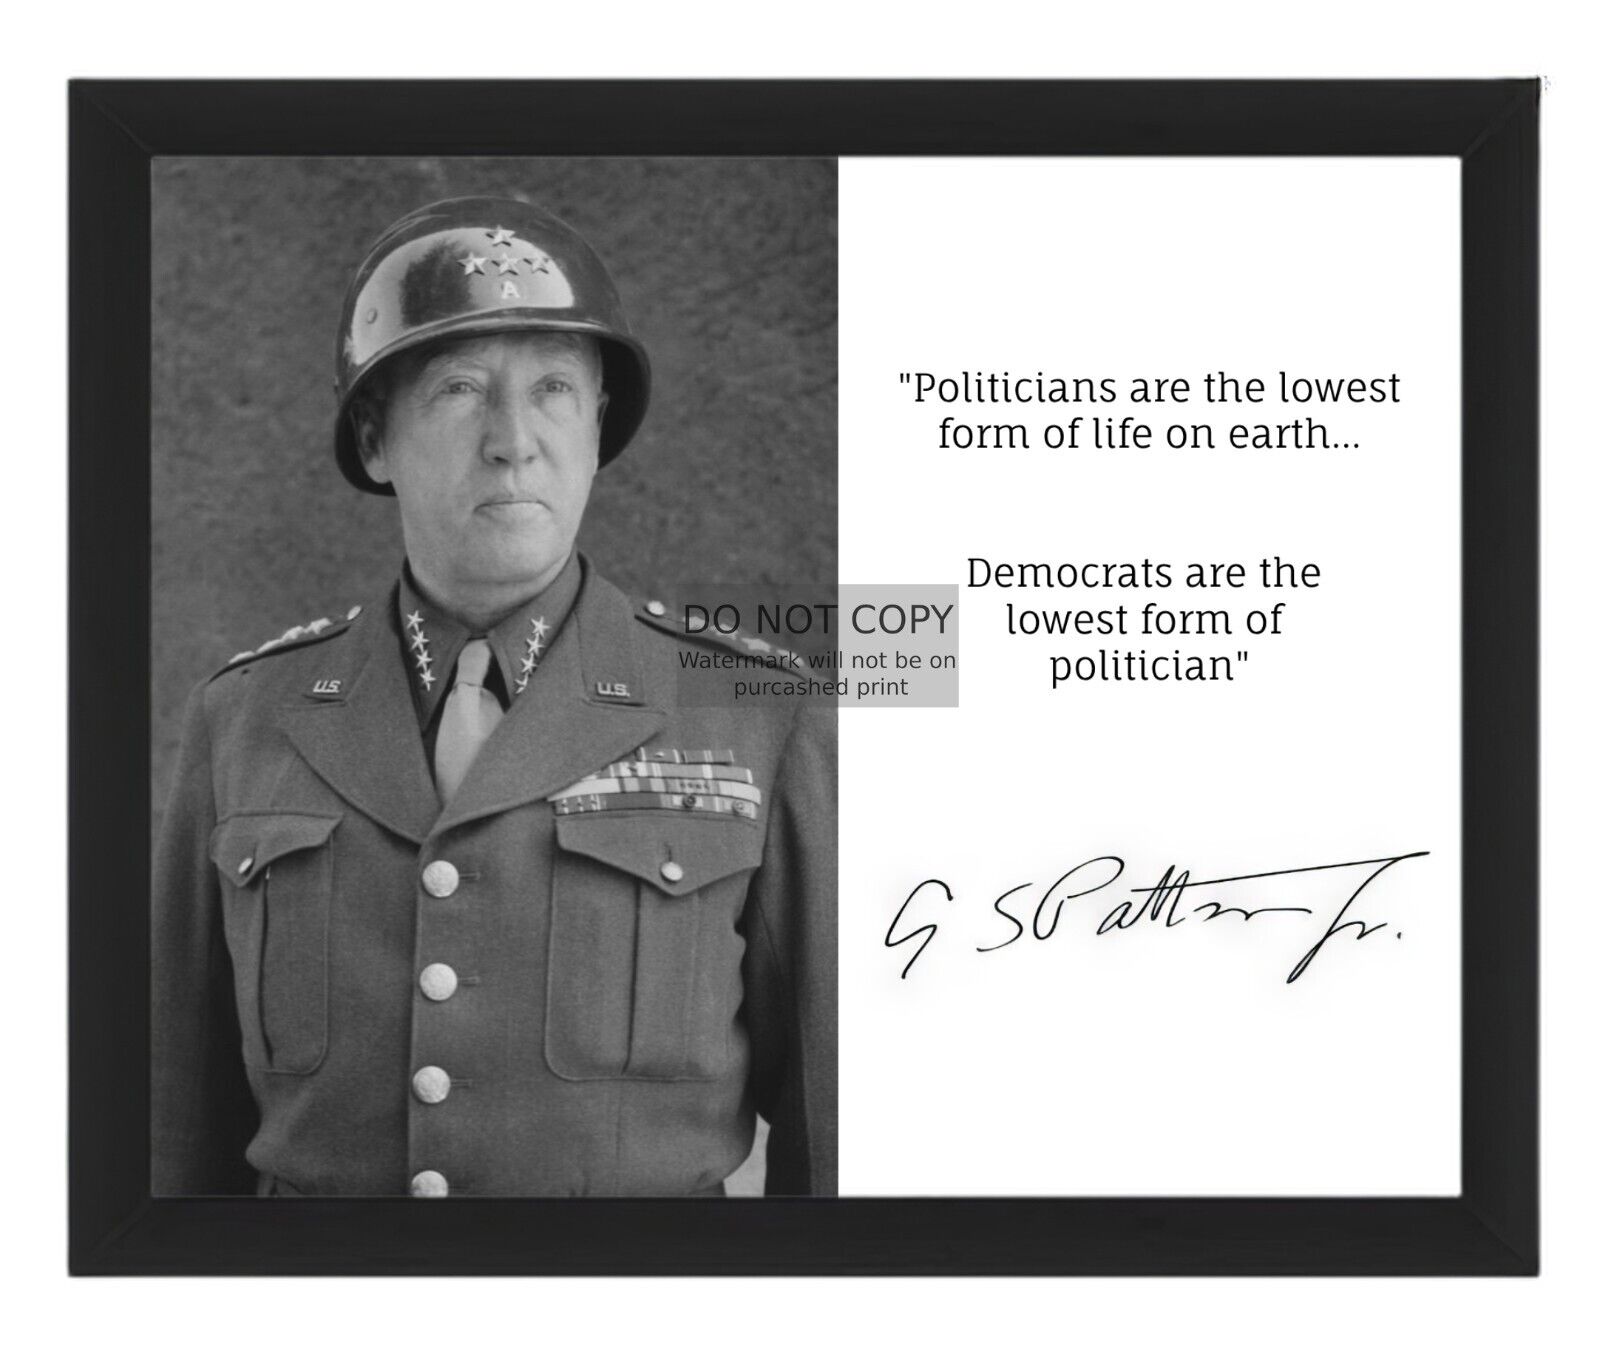 GENERAL GEORGE S. PATTON DEMOCRATS ARE THE LOWEST FORM OF POLITICIAN 8X10 PHOTO